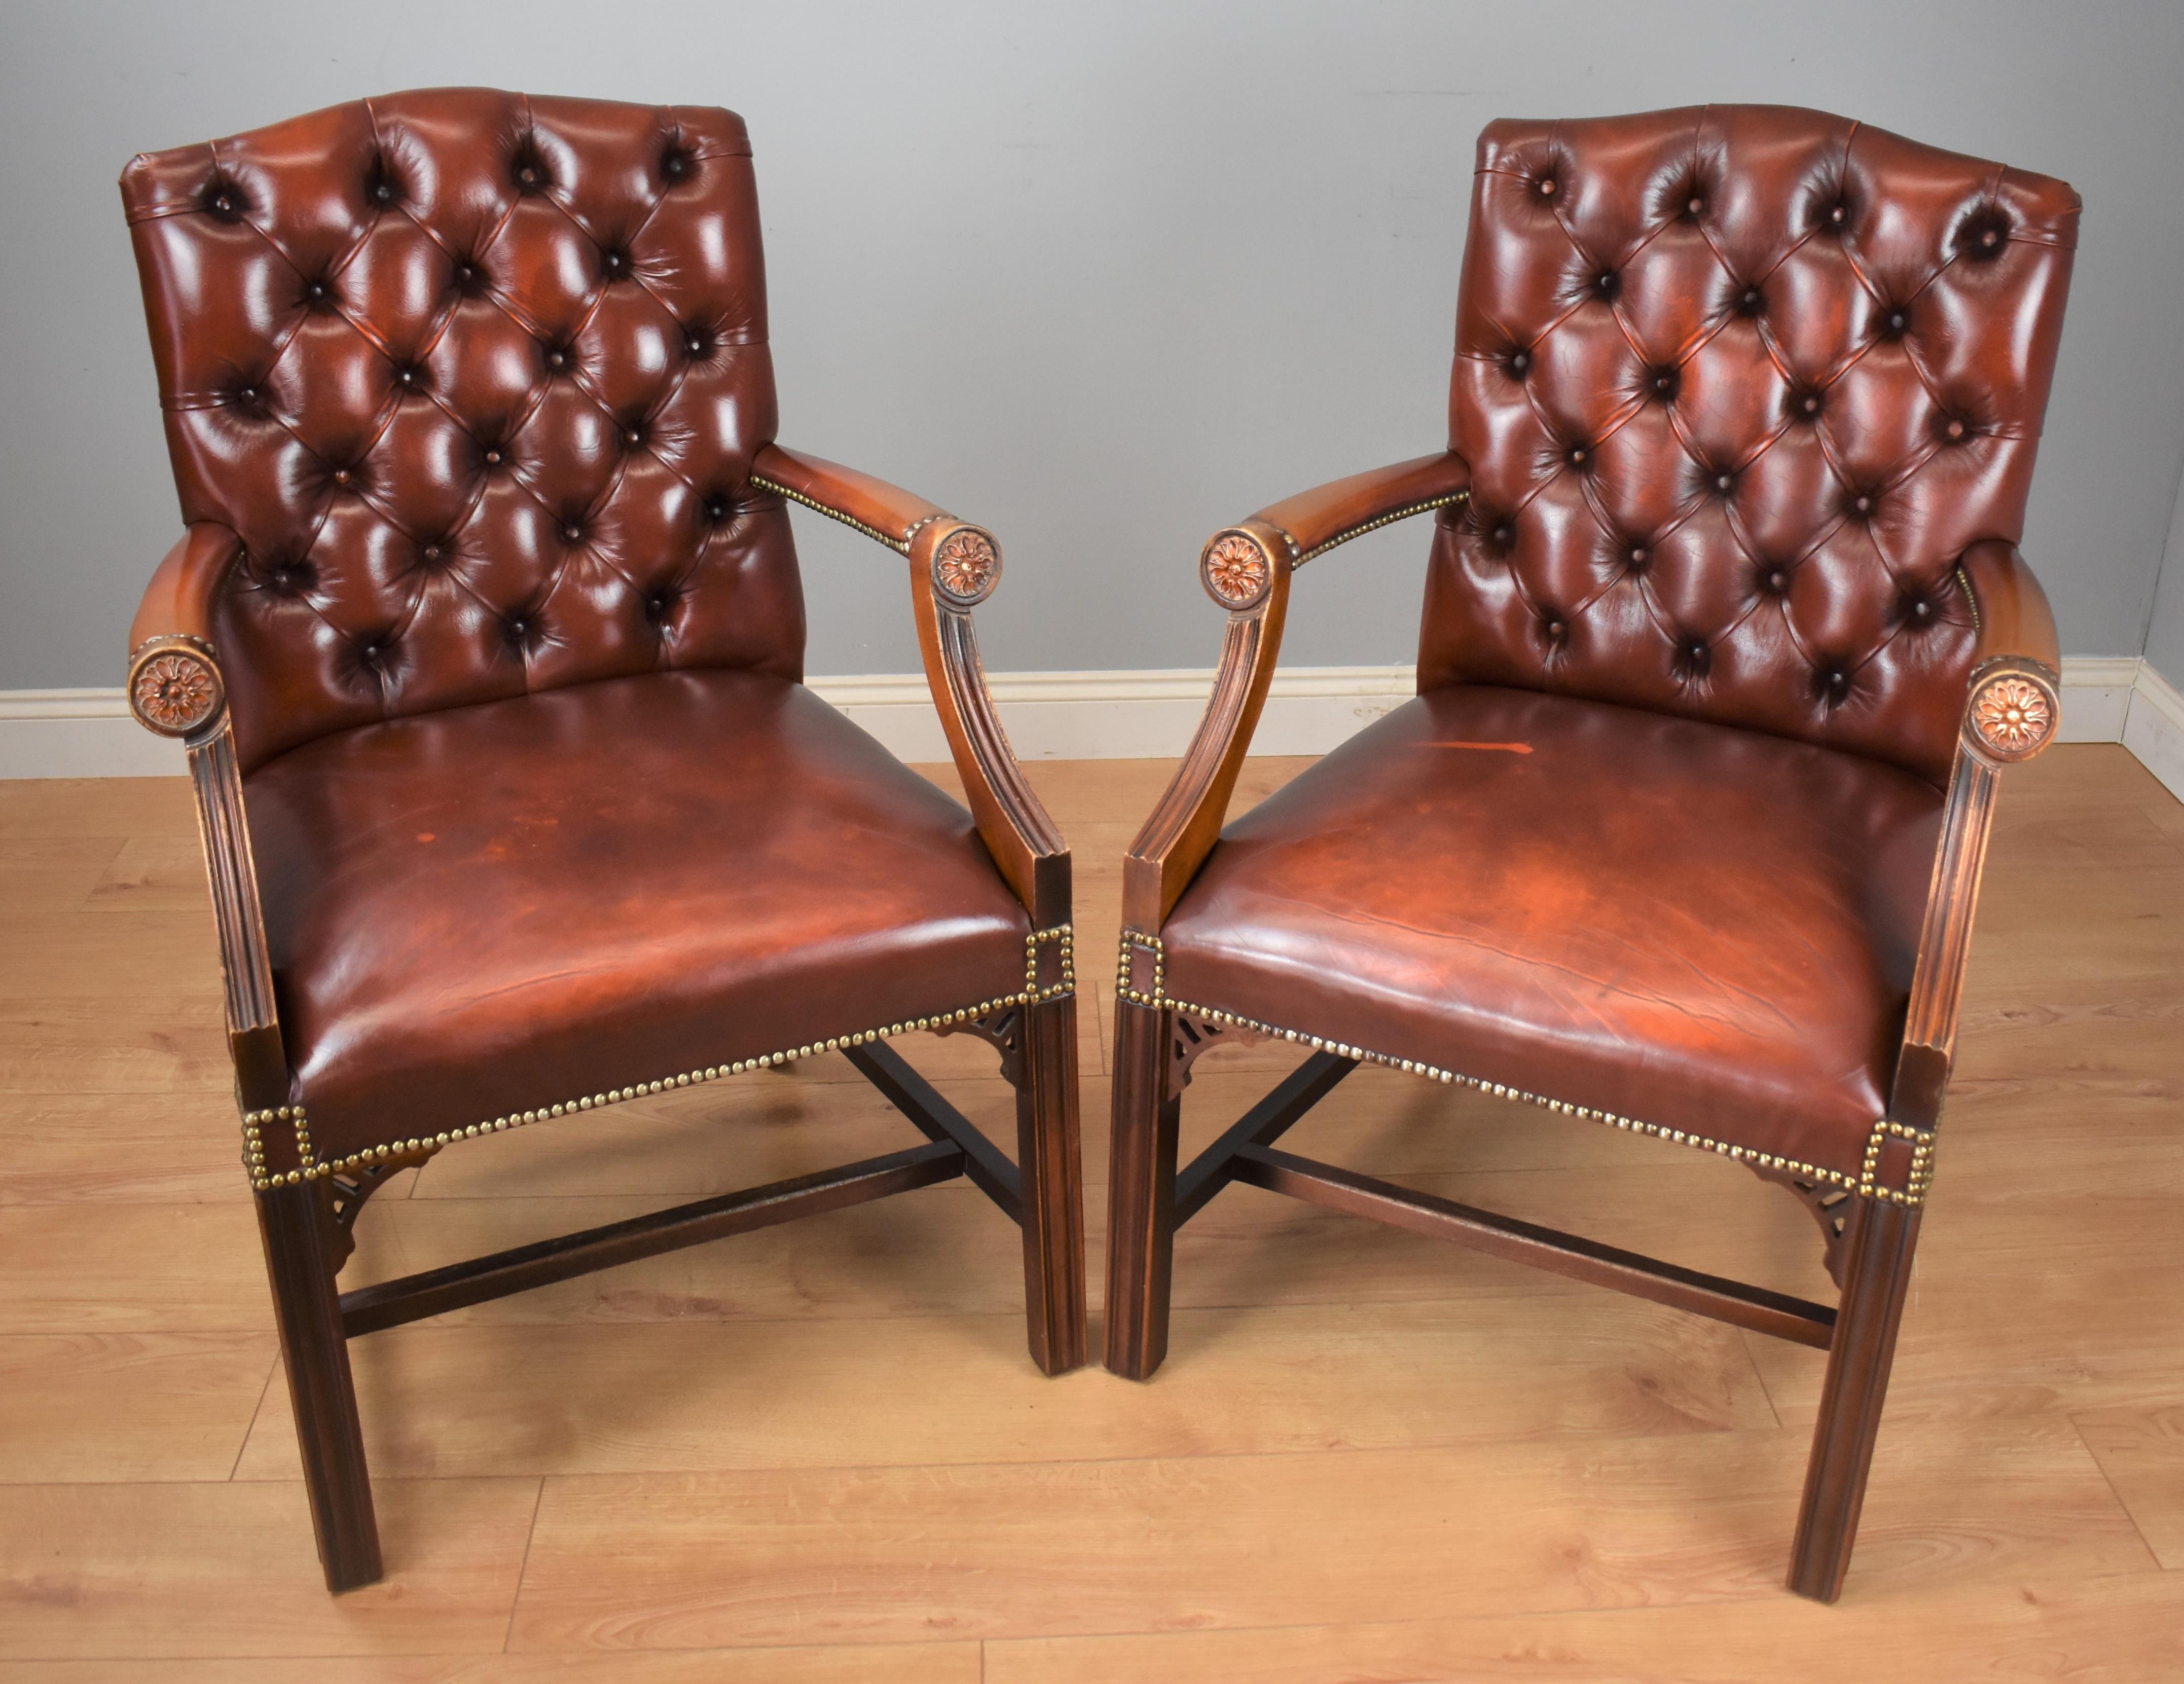 European Pair of Mid-20th Century Leather Gainsborough Chairs